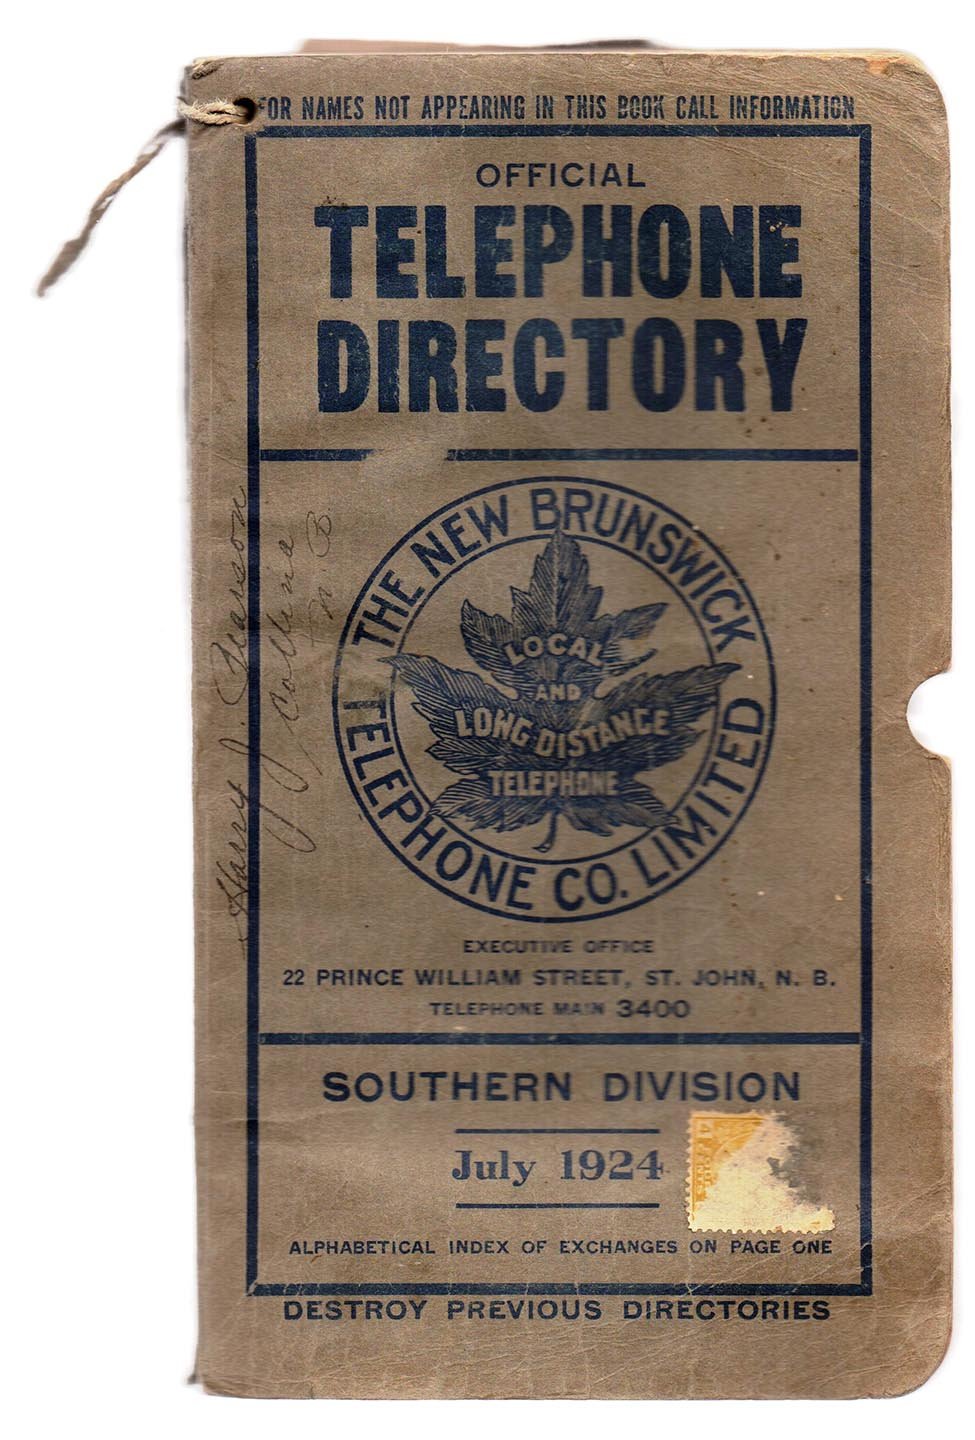 Official Telephone Directory, New Brunswick Telephone Co., Southern Division, July 1924